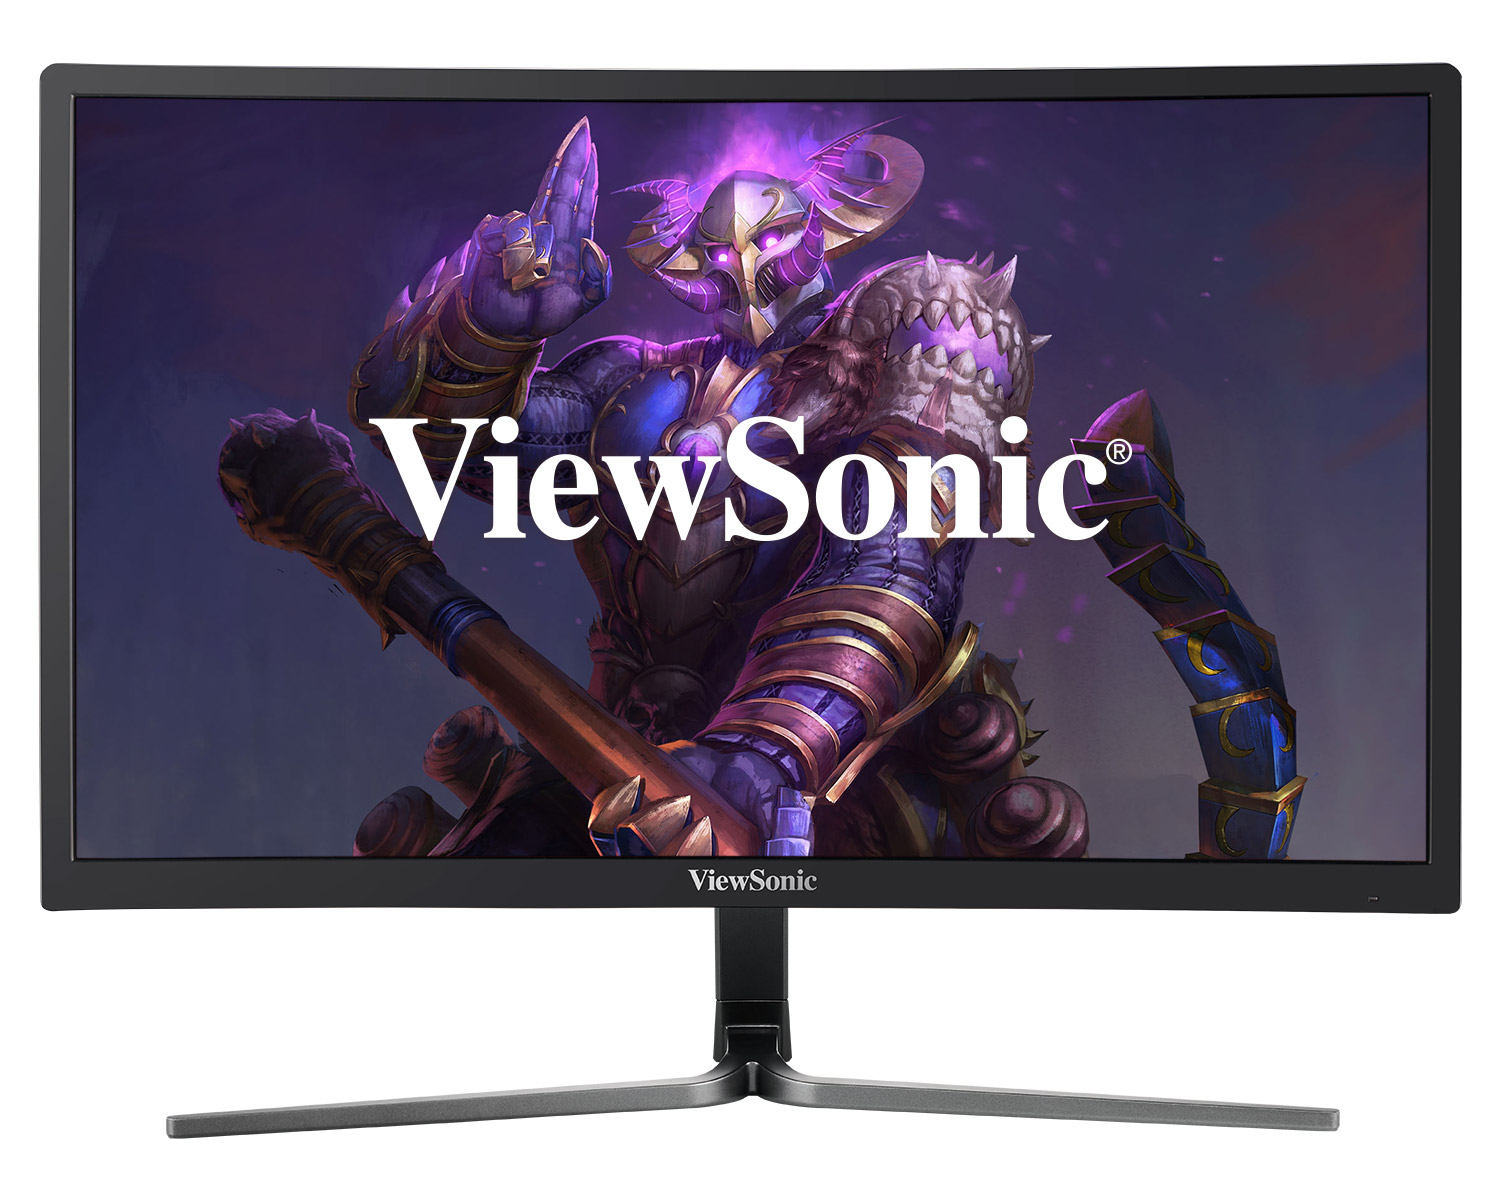 24 inch monitor on sale abc warehouse